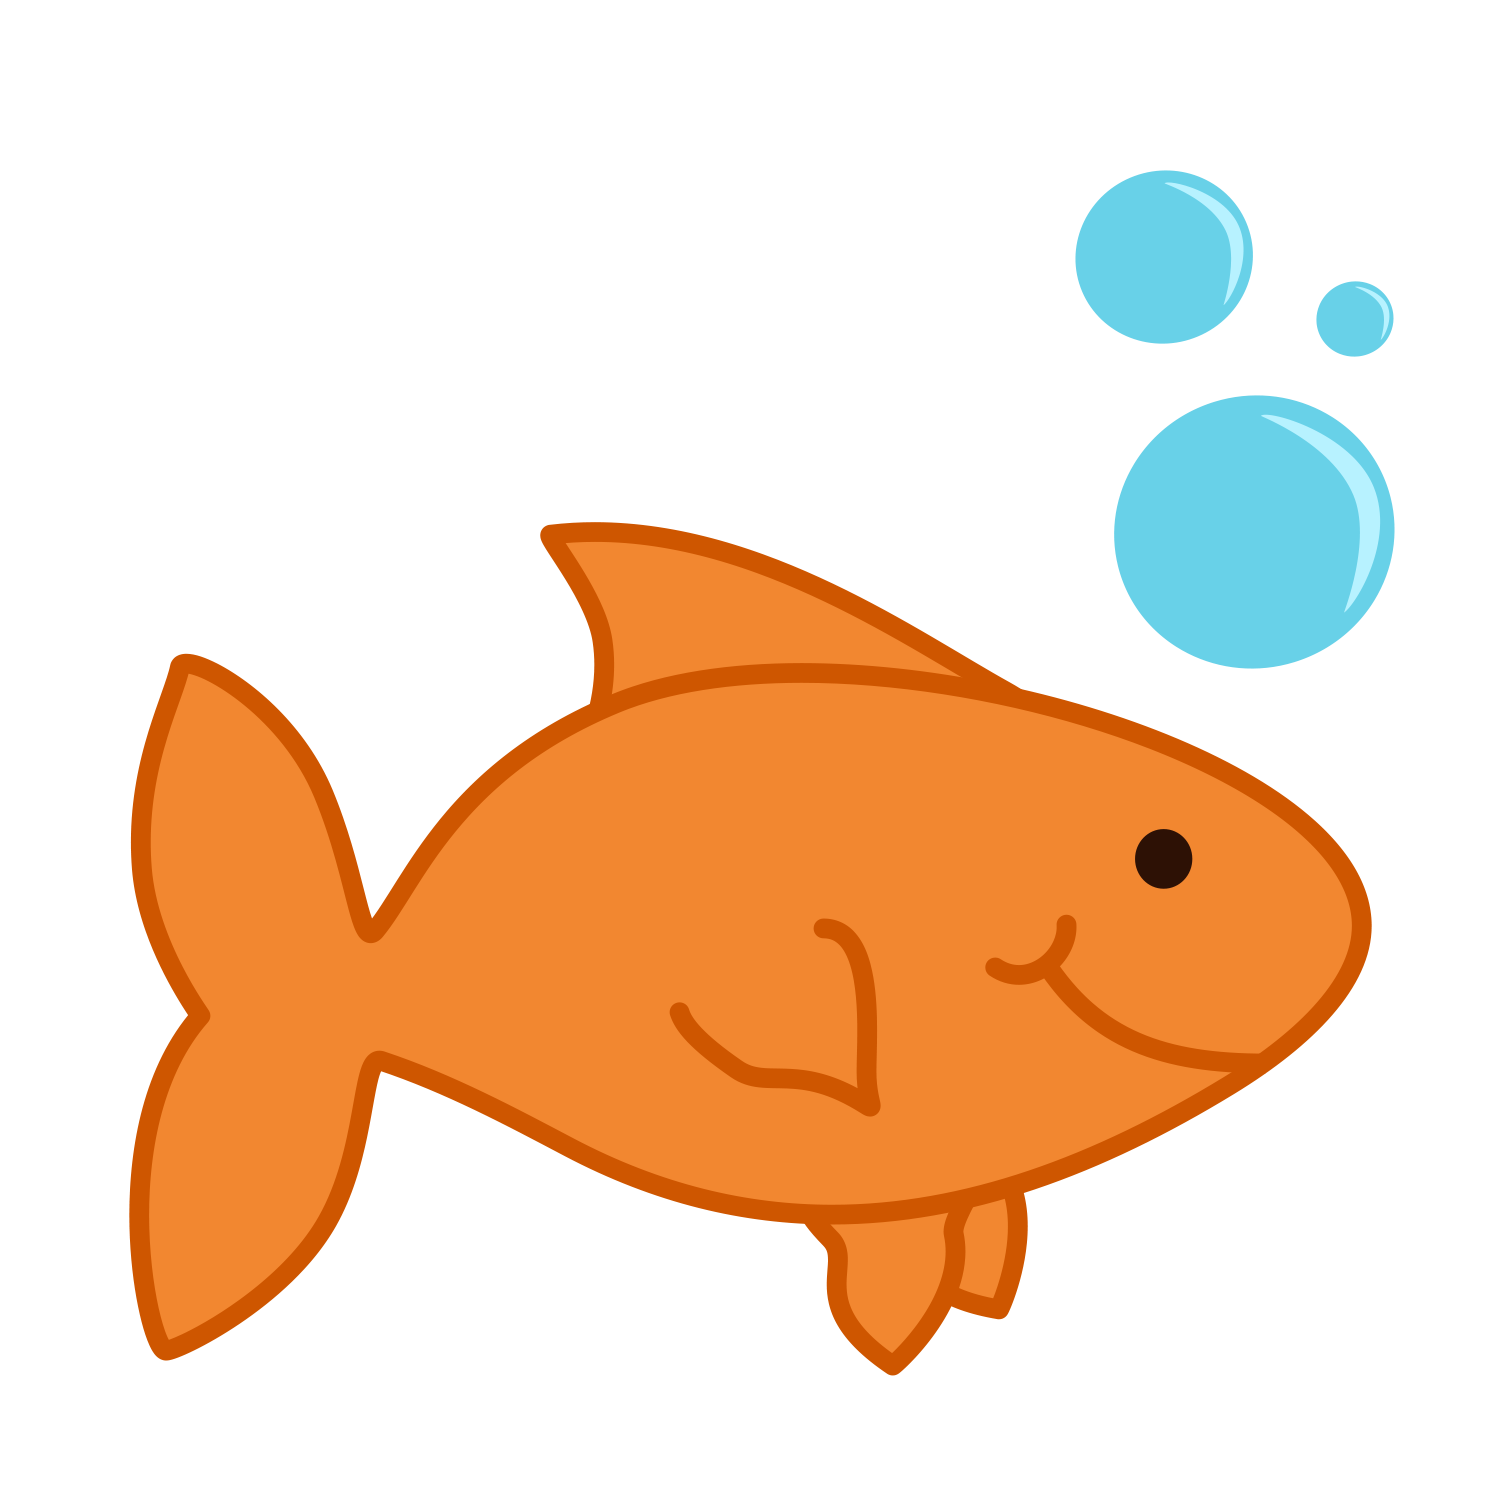 Goldfish Blank Card Printable and Free matching clip-art image 